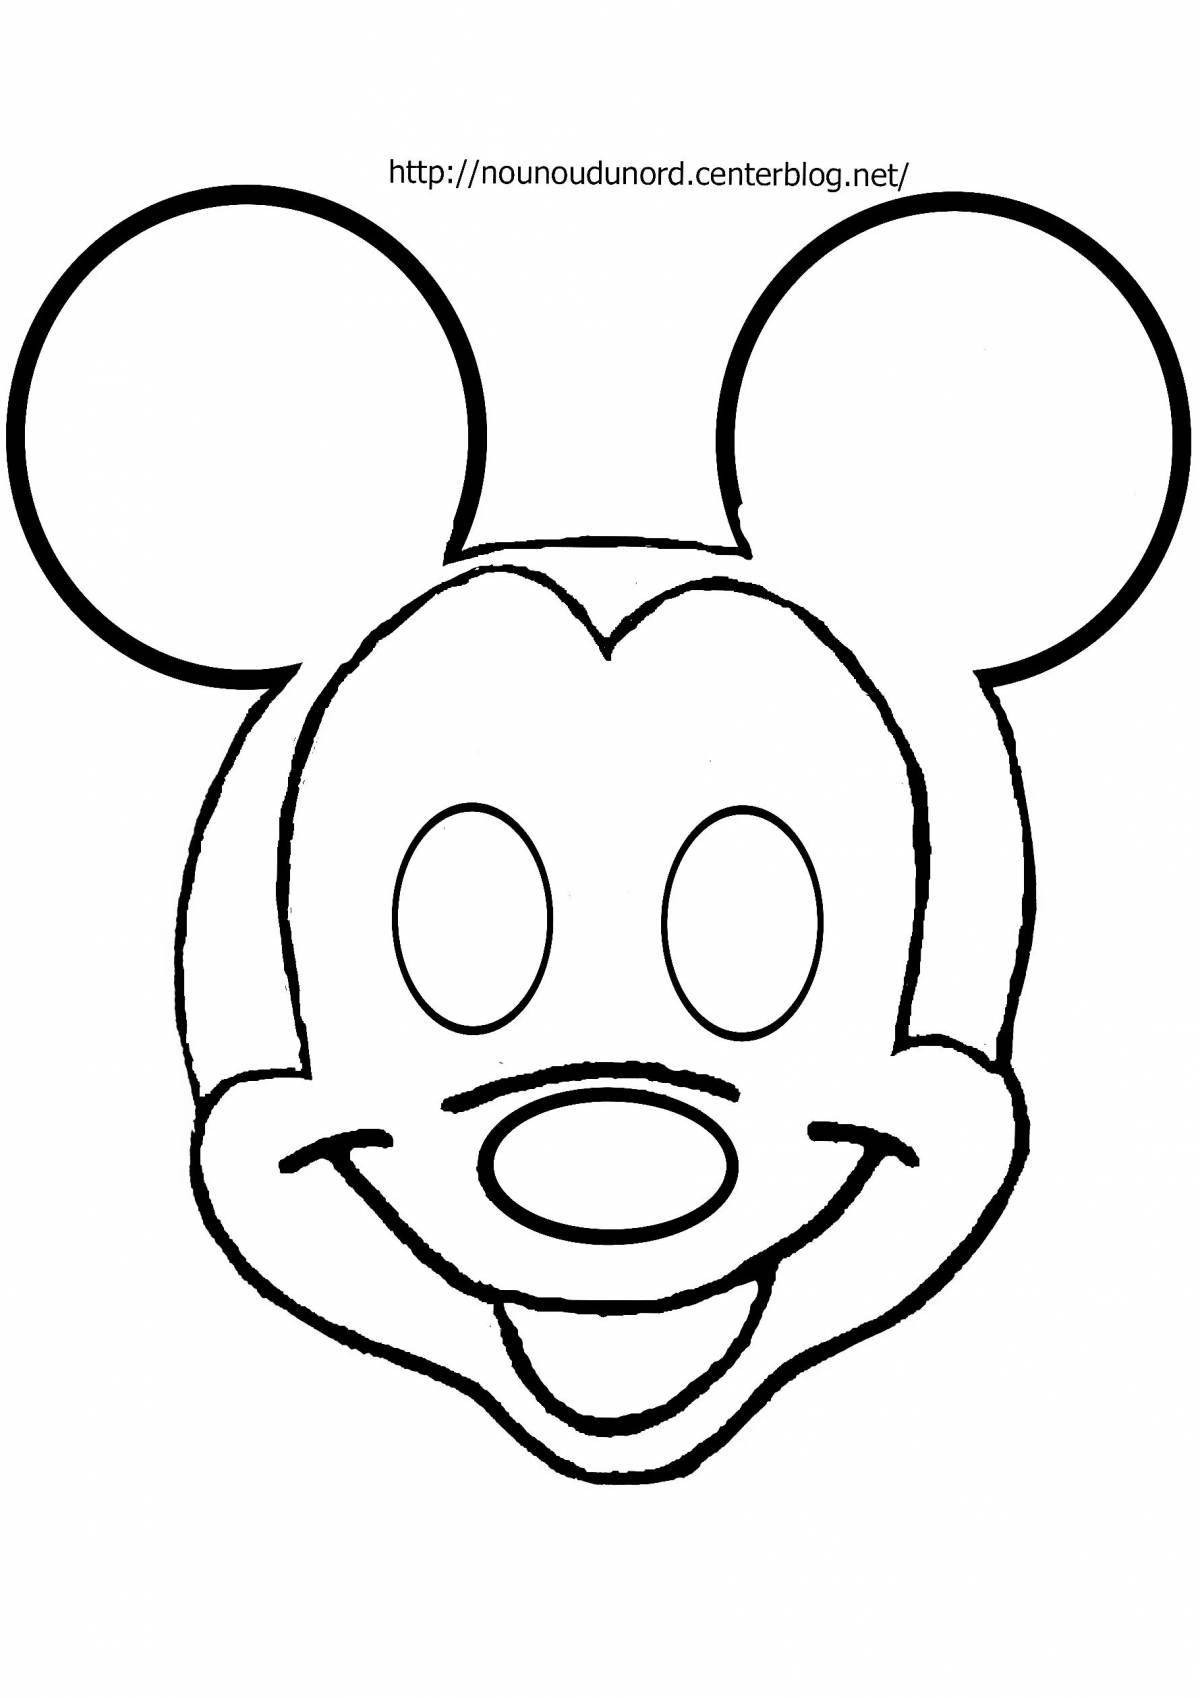 Incredible mouse head coloring book